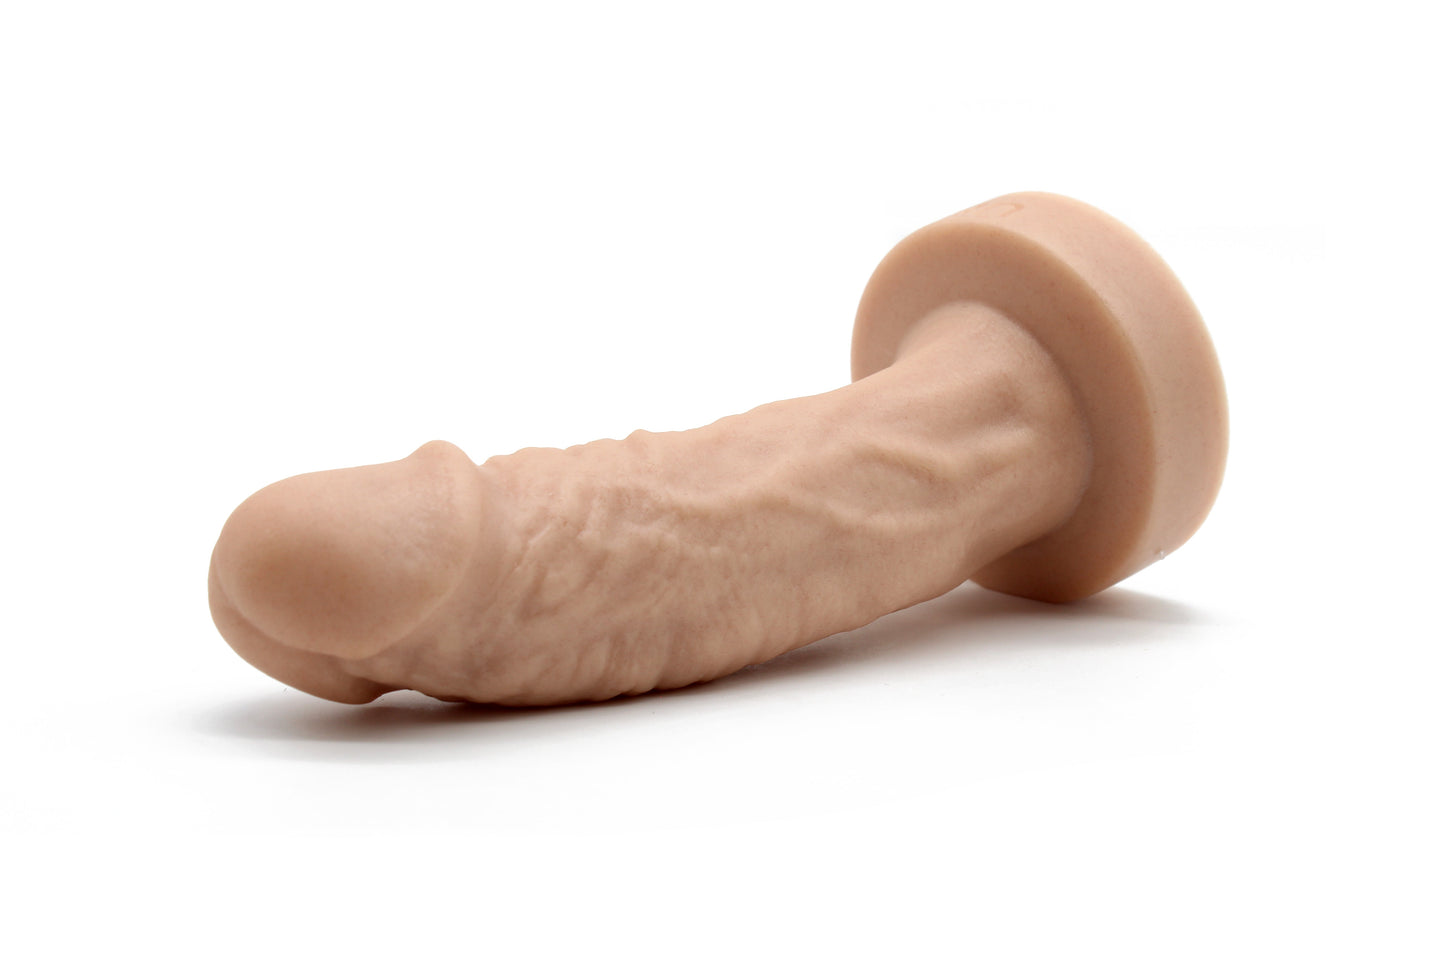 The Divo Realistic Dildo - Large Size